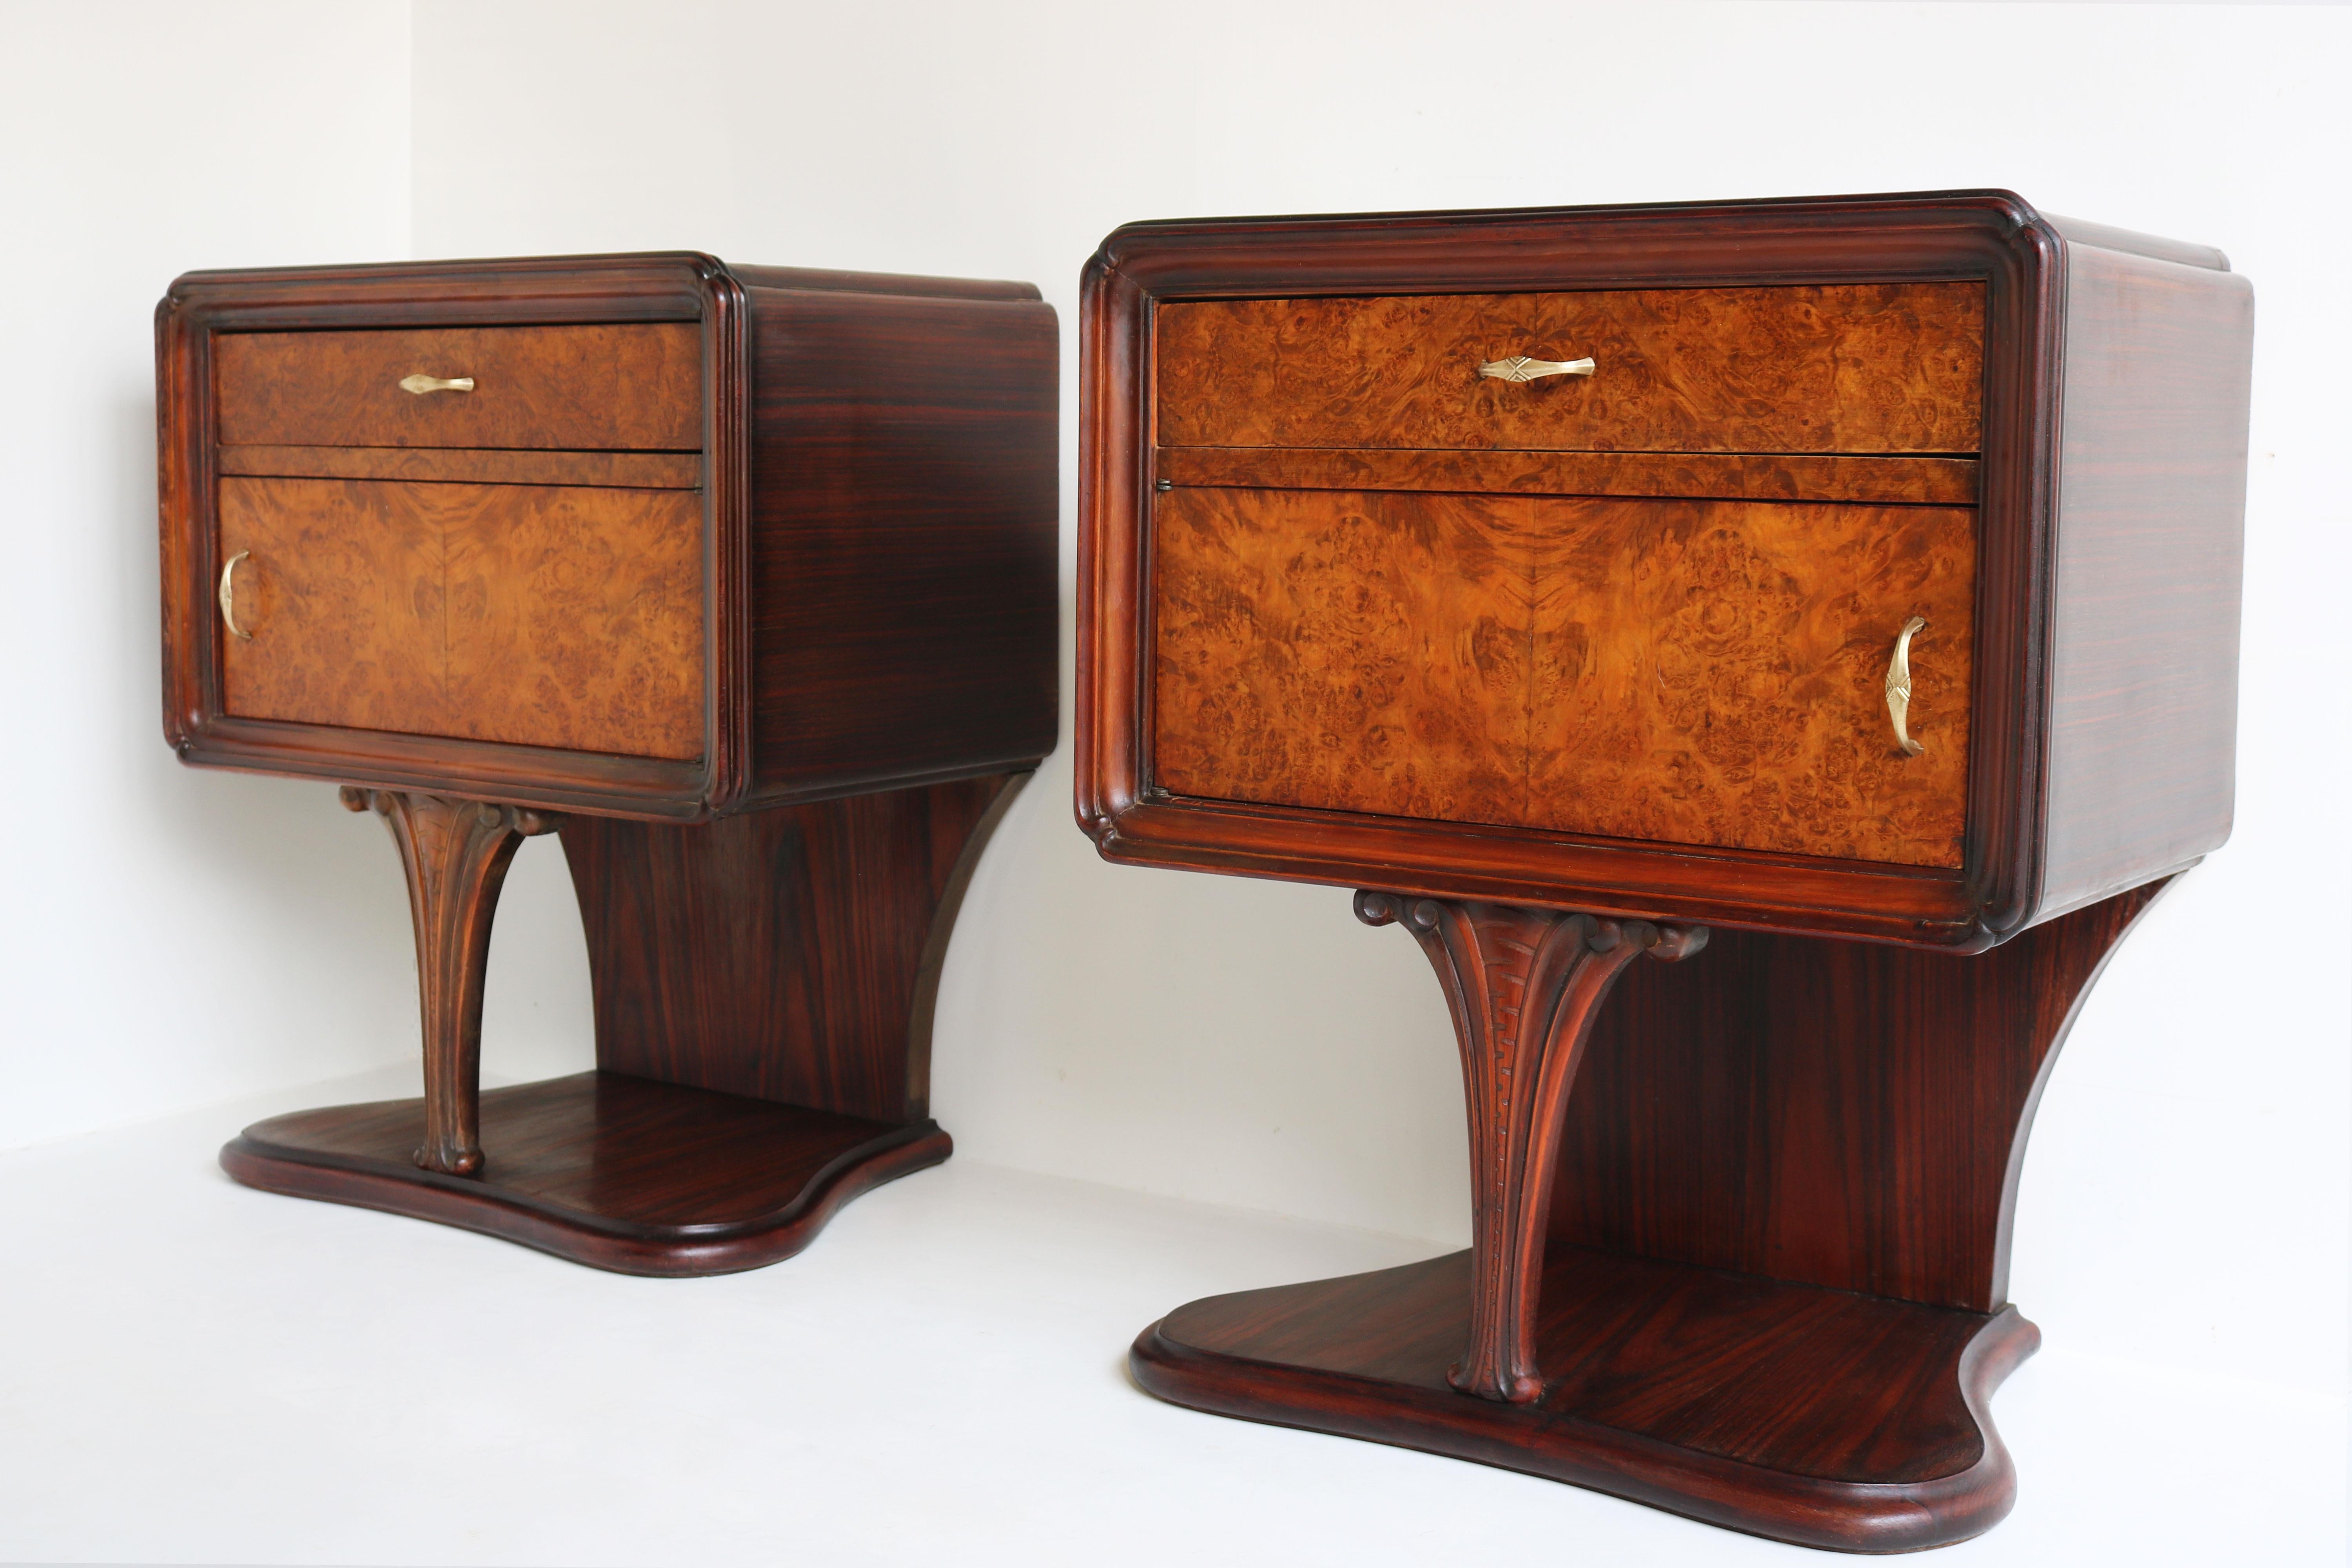 Exquisite Italian Art Deco bedside tables, clean and yet elegant design from the 1930s. 
Amazing quality craftsmanship with rosewood & walnut burl creating a stylish high quality feeling. 
The bedside tables appear to float on the graceful front